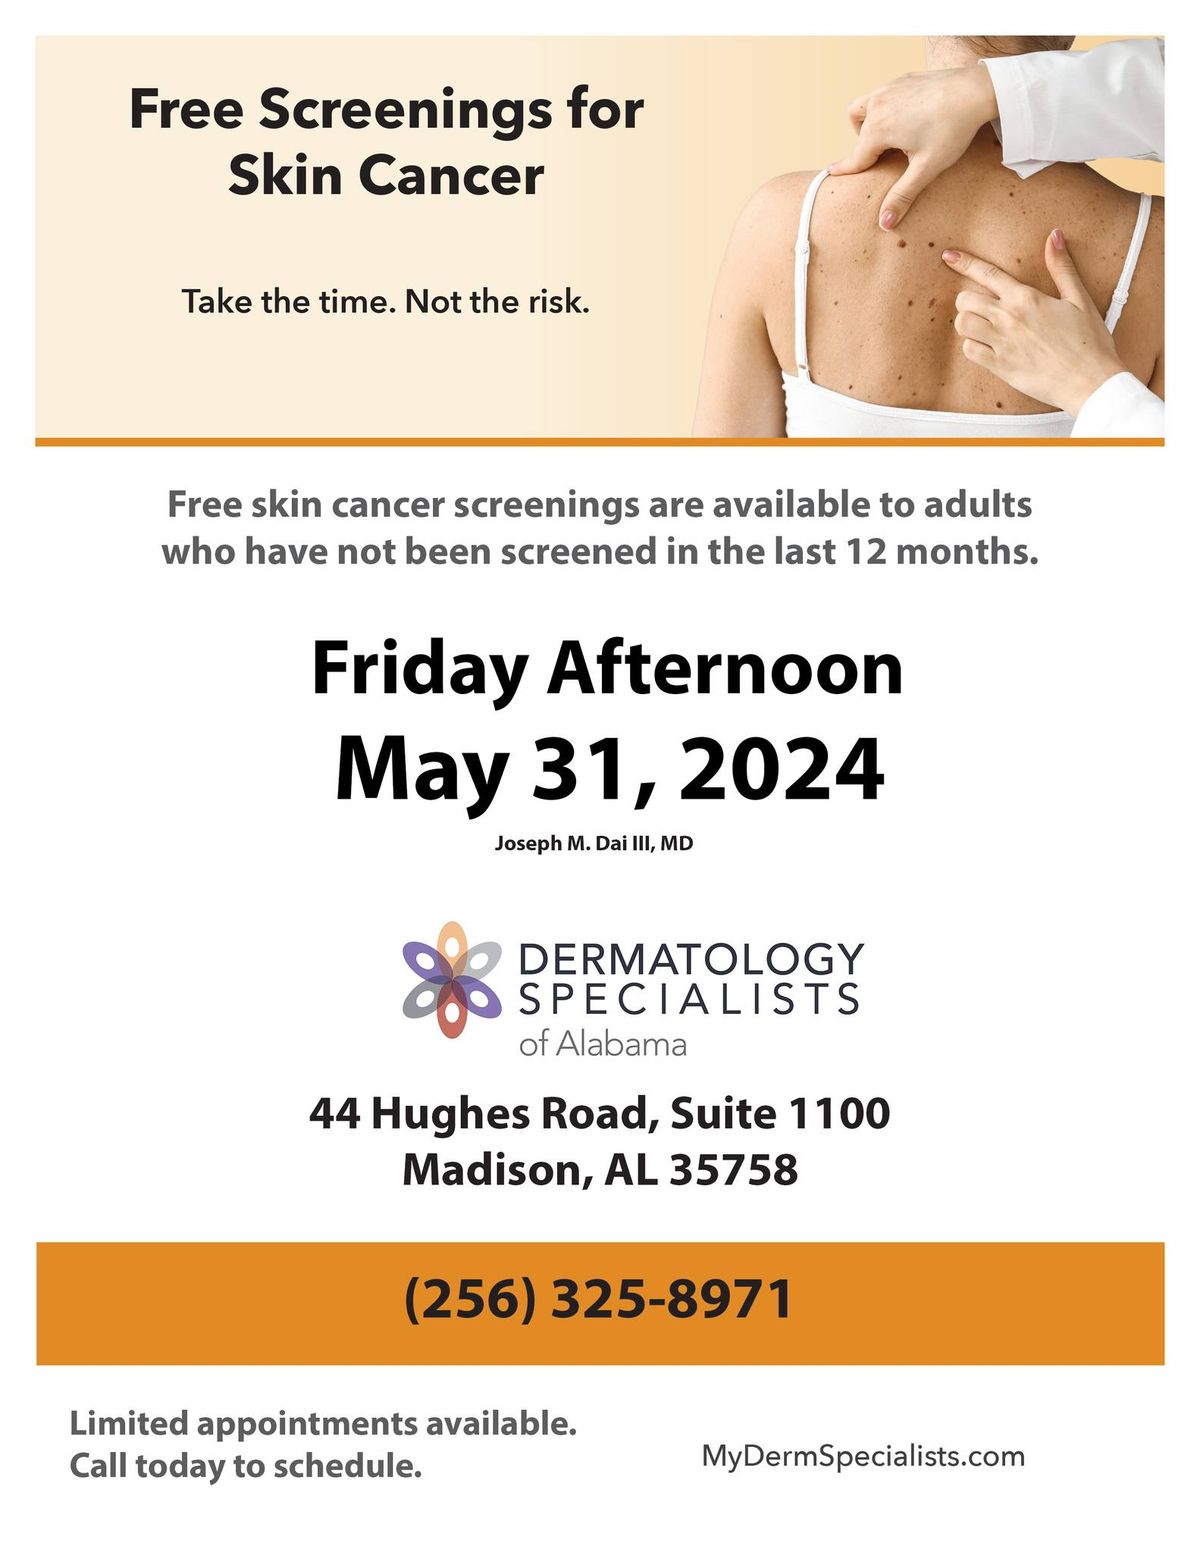 Free Screenings for Skin Cancer - Madison, AL